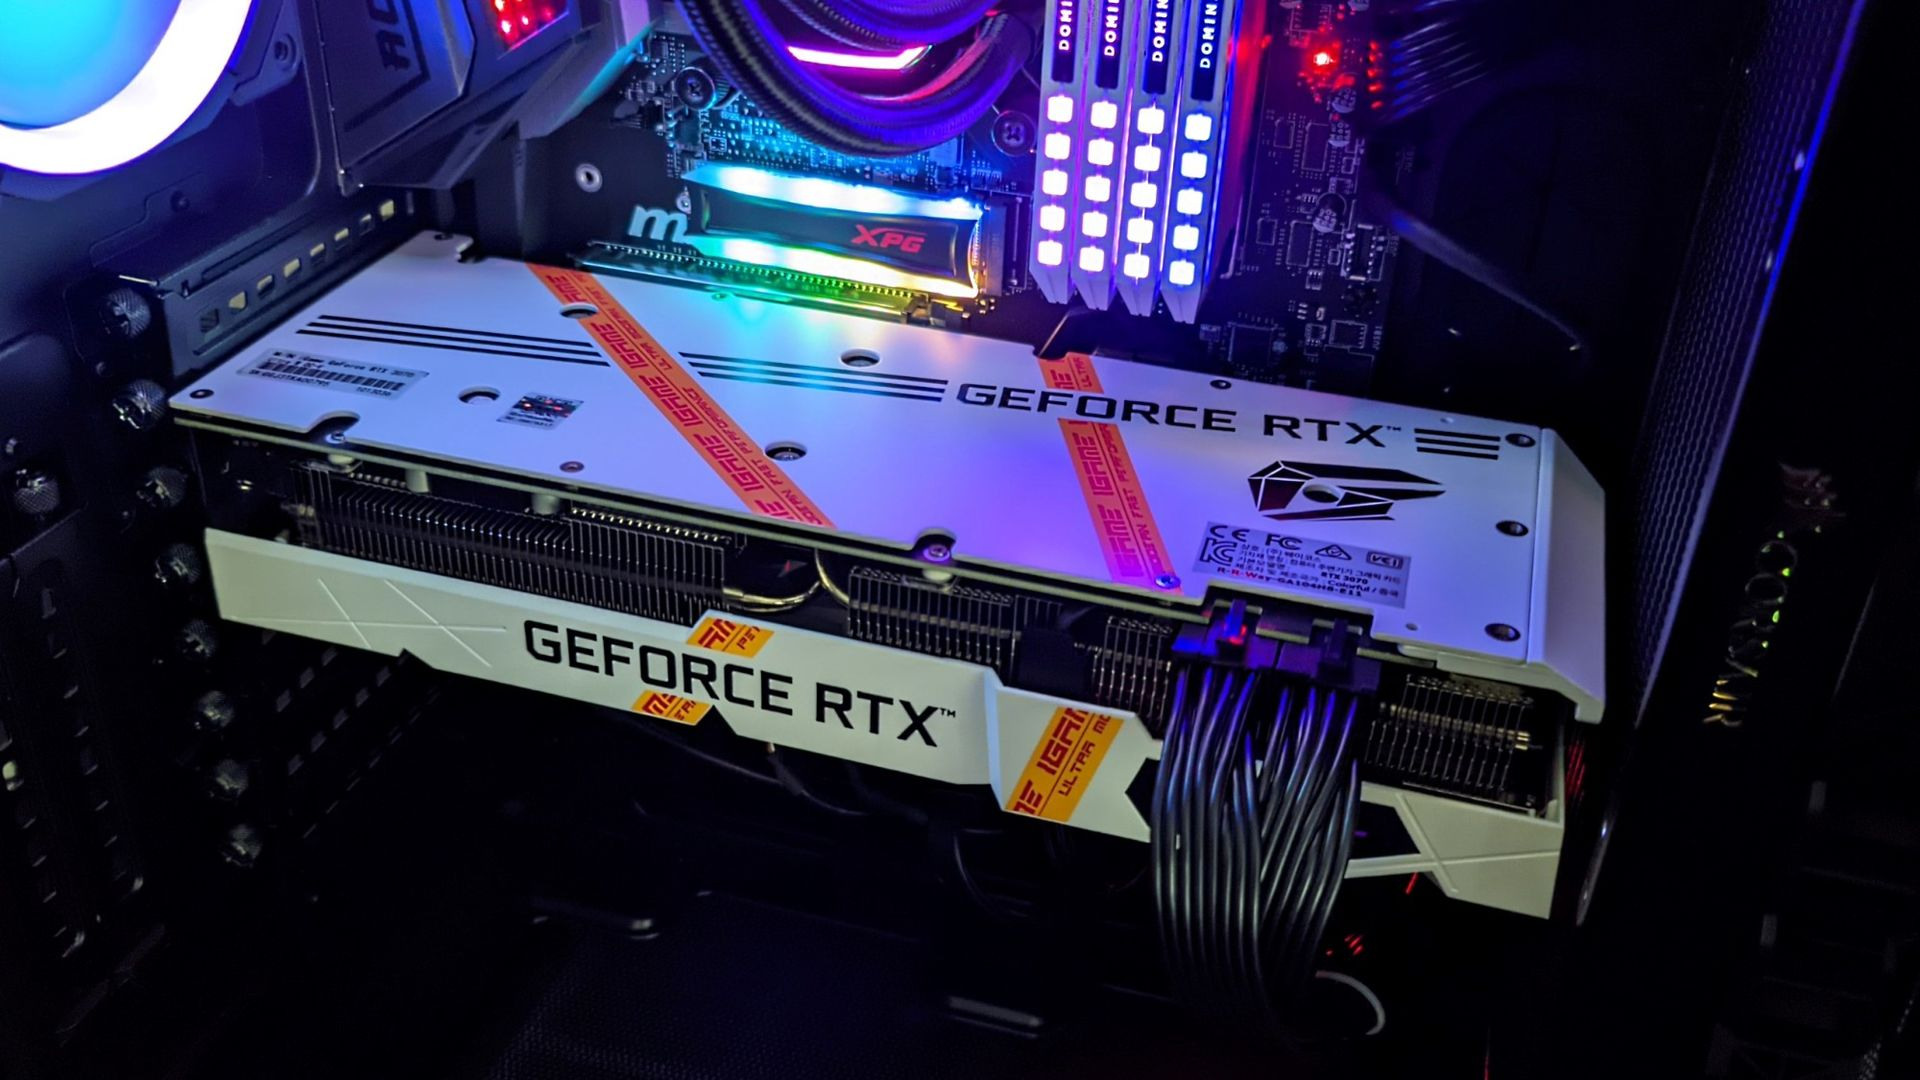 4060 colorful igame. Colorful IGAME RTX 3070 ti Ultra w OC. Видеокарта colorful IGAME GEFORCE RTX 3060 Ultra. Colorful IGAME GEFORCE RTX 3070 Ultra w OC. Видеокарта RTX 3070 ti.